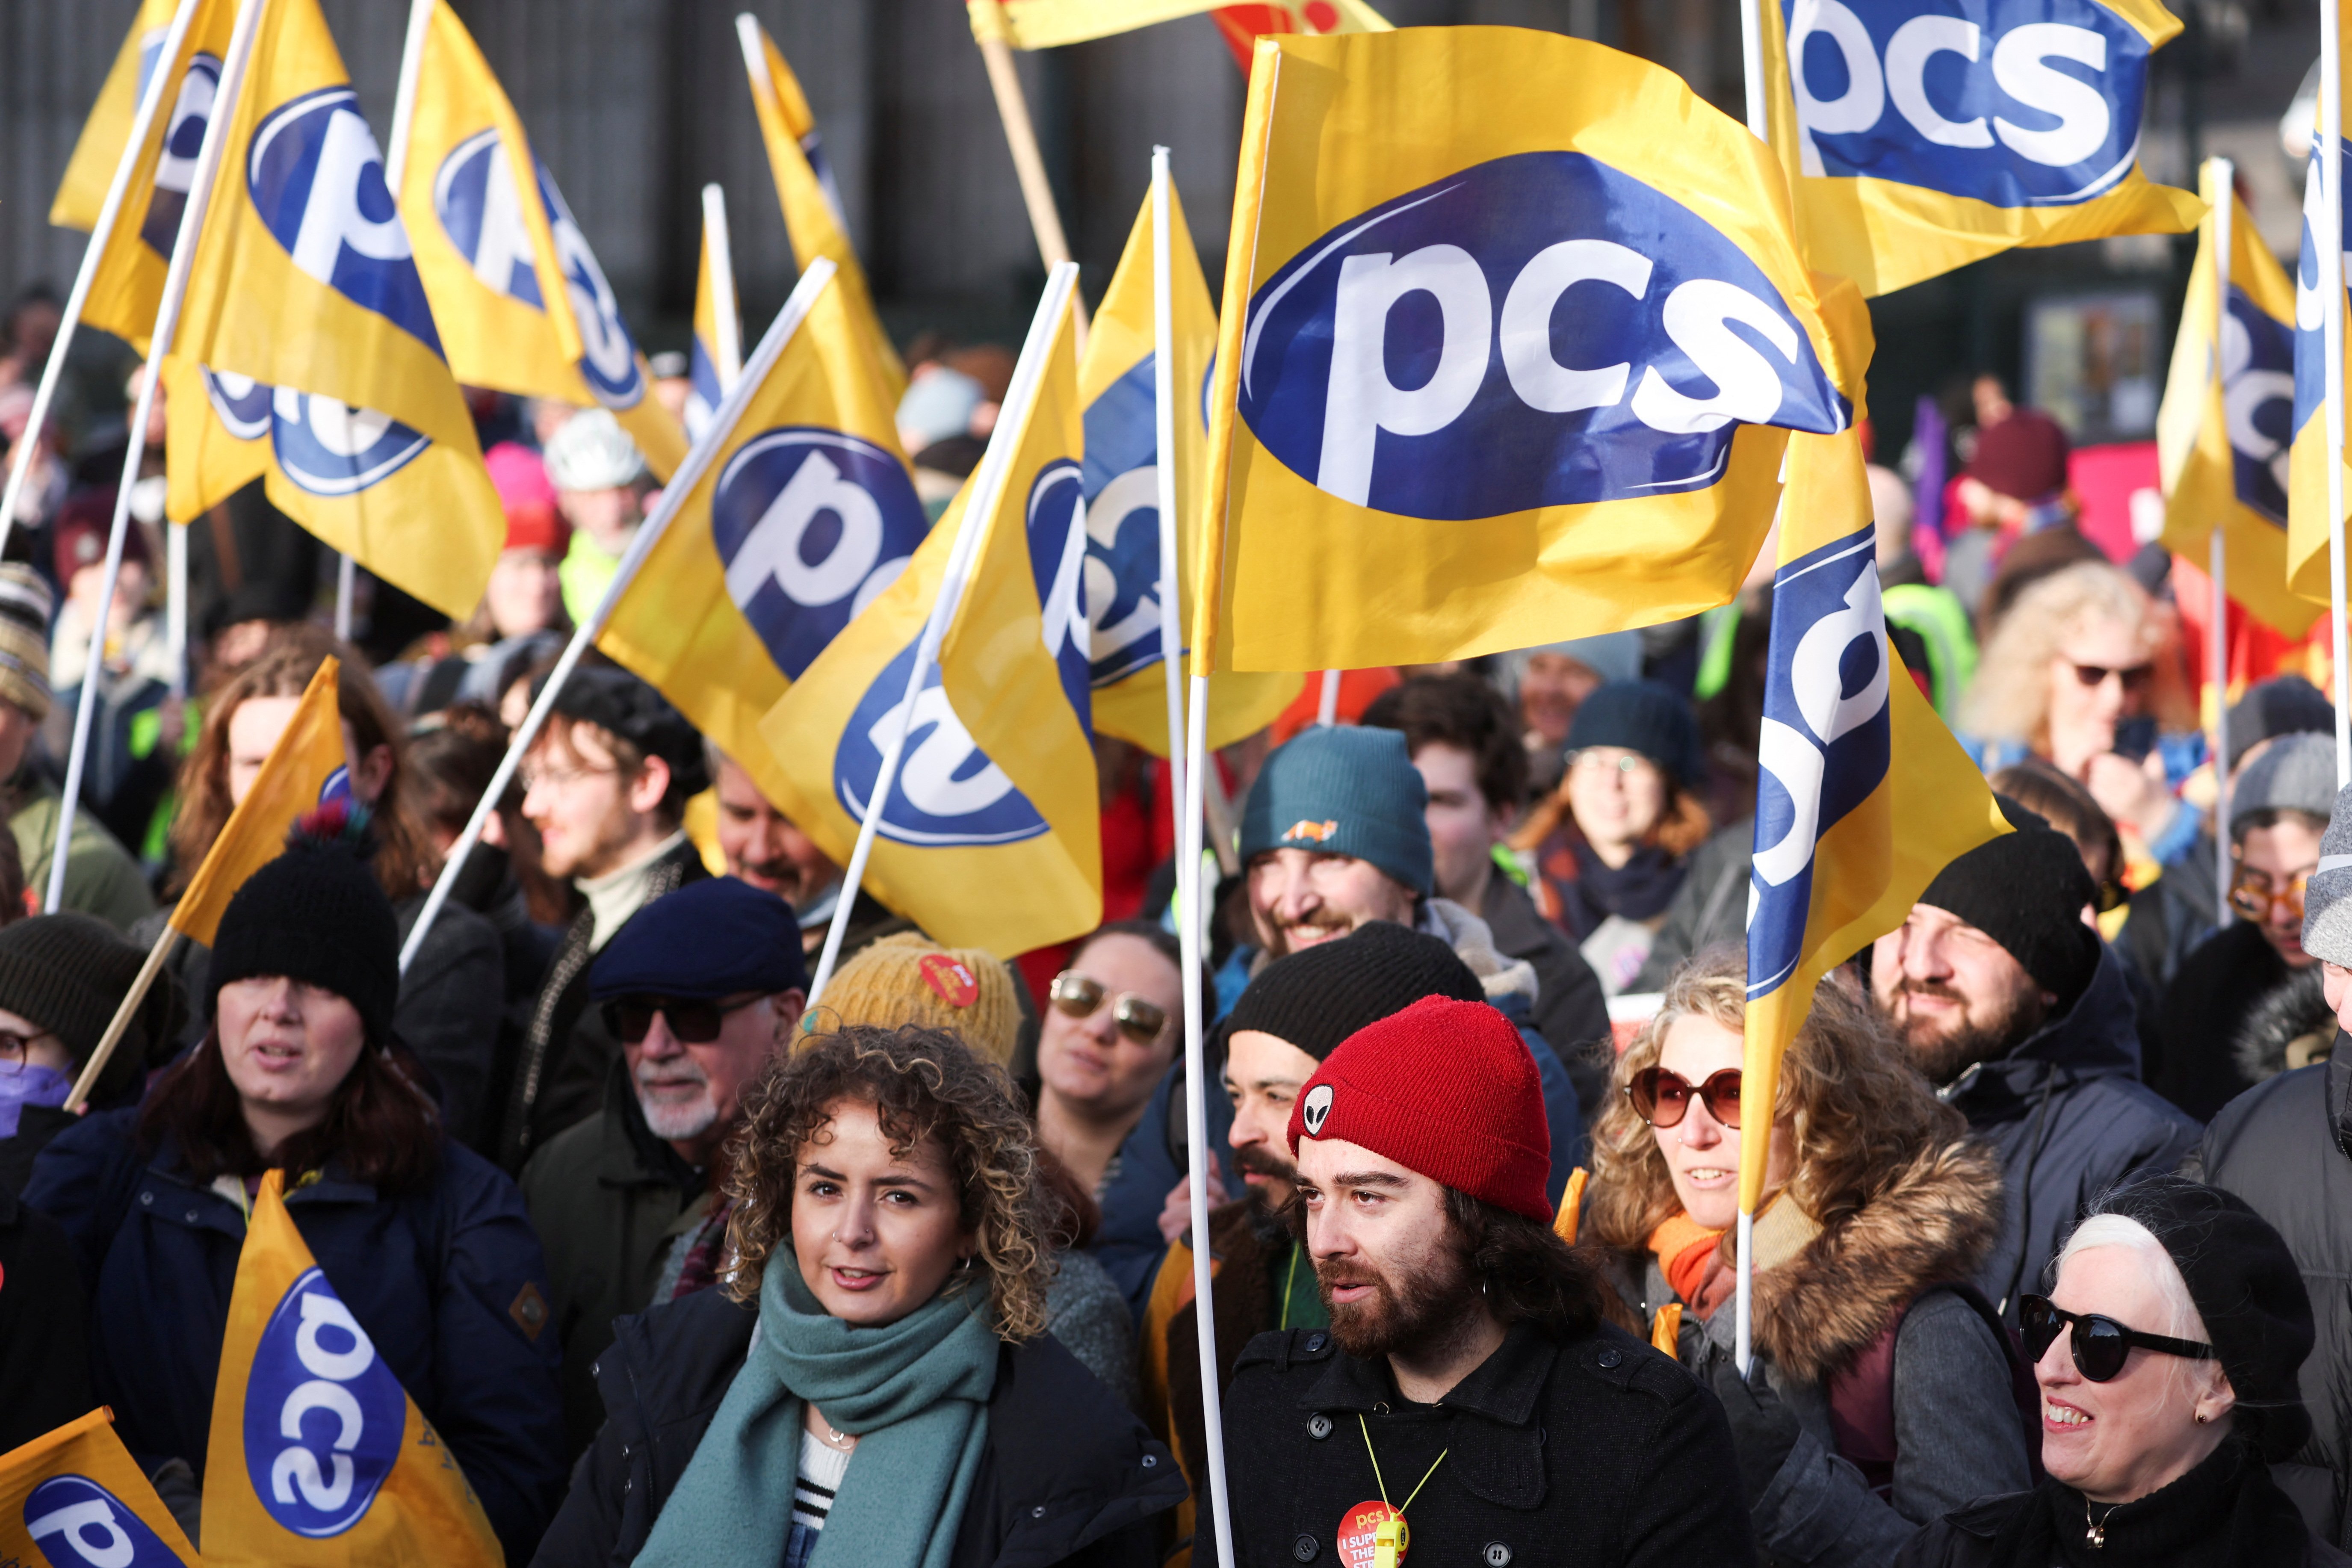 Members of PCS union attend a rally at the Mound, in Edinburgh